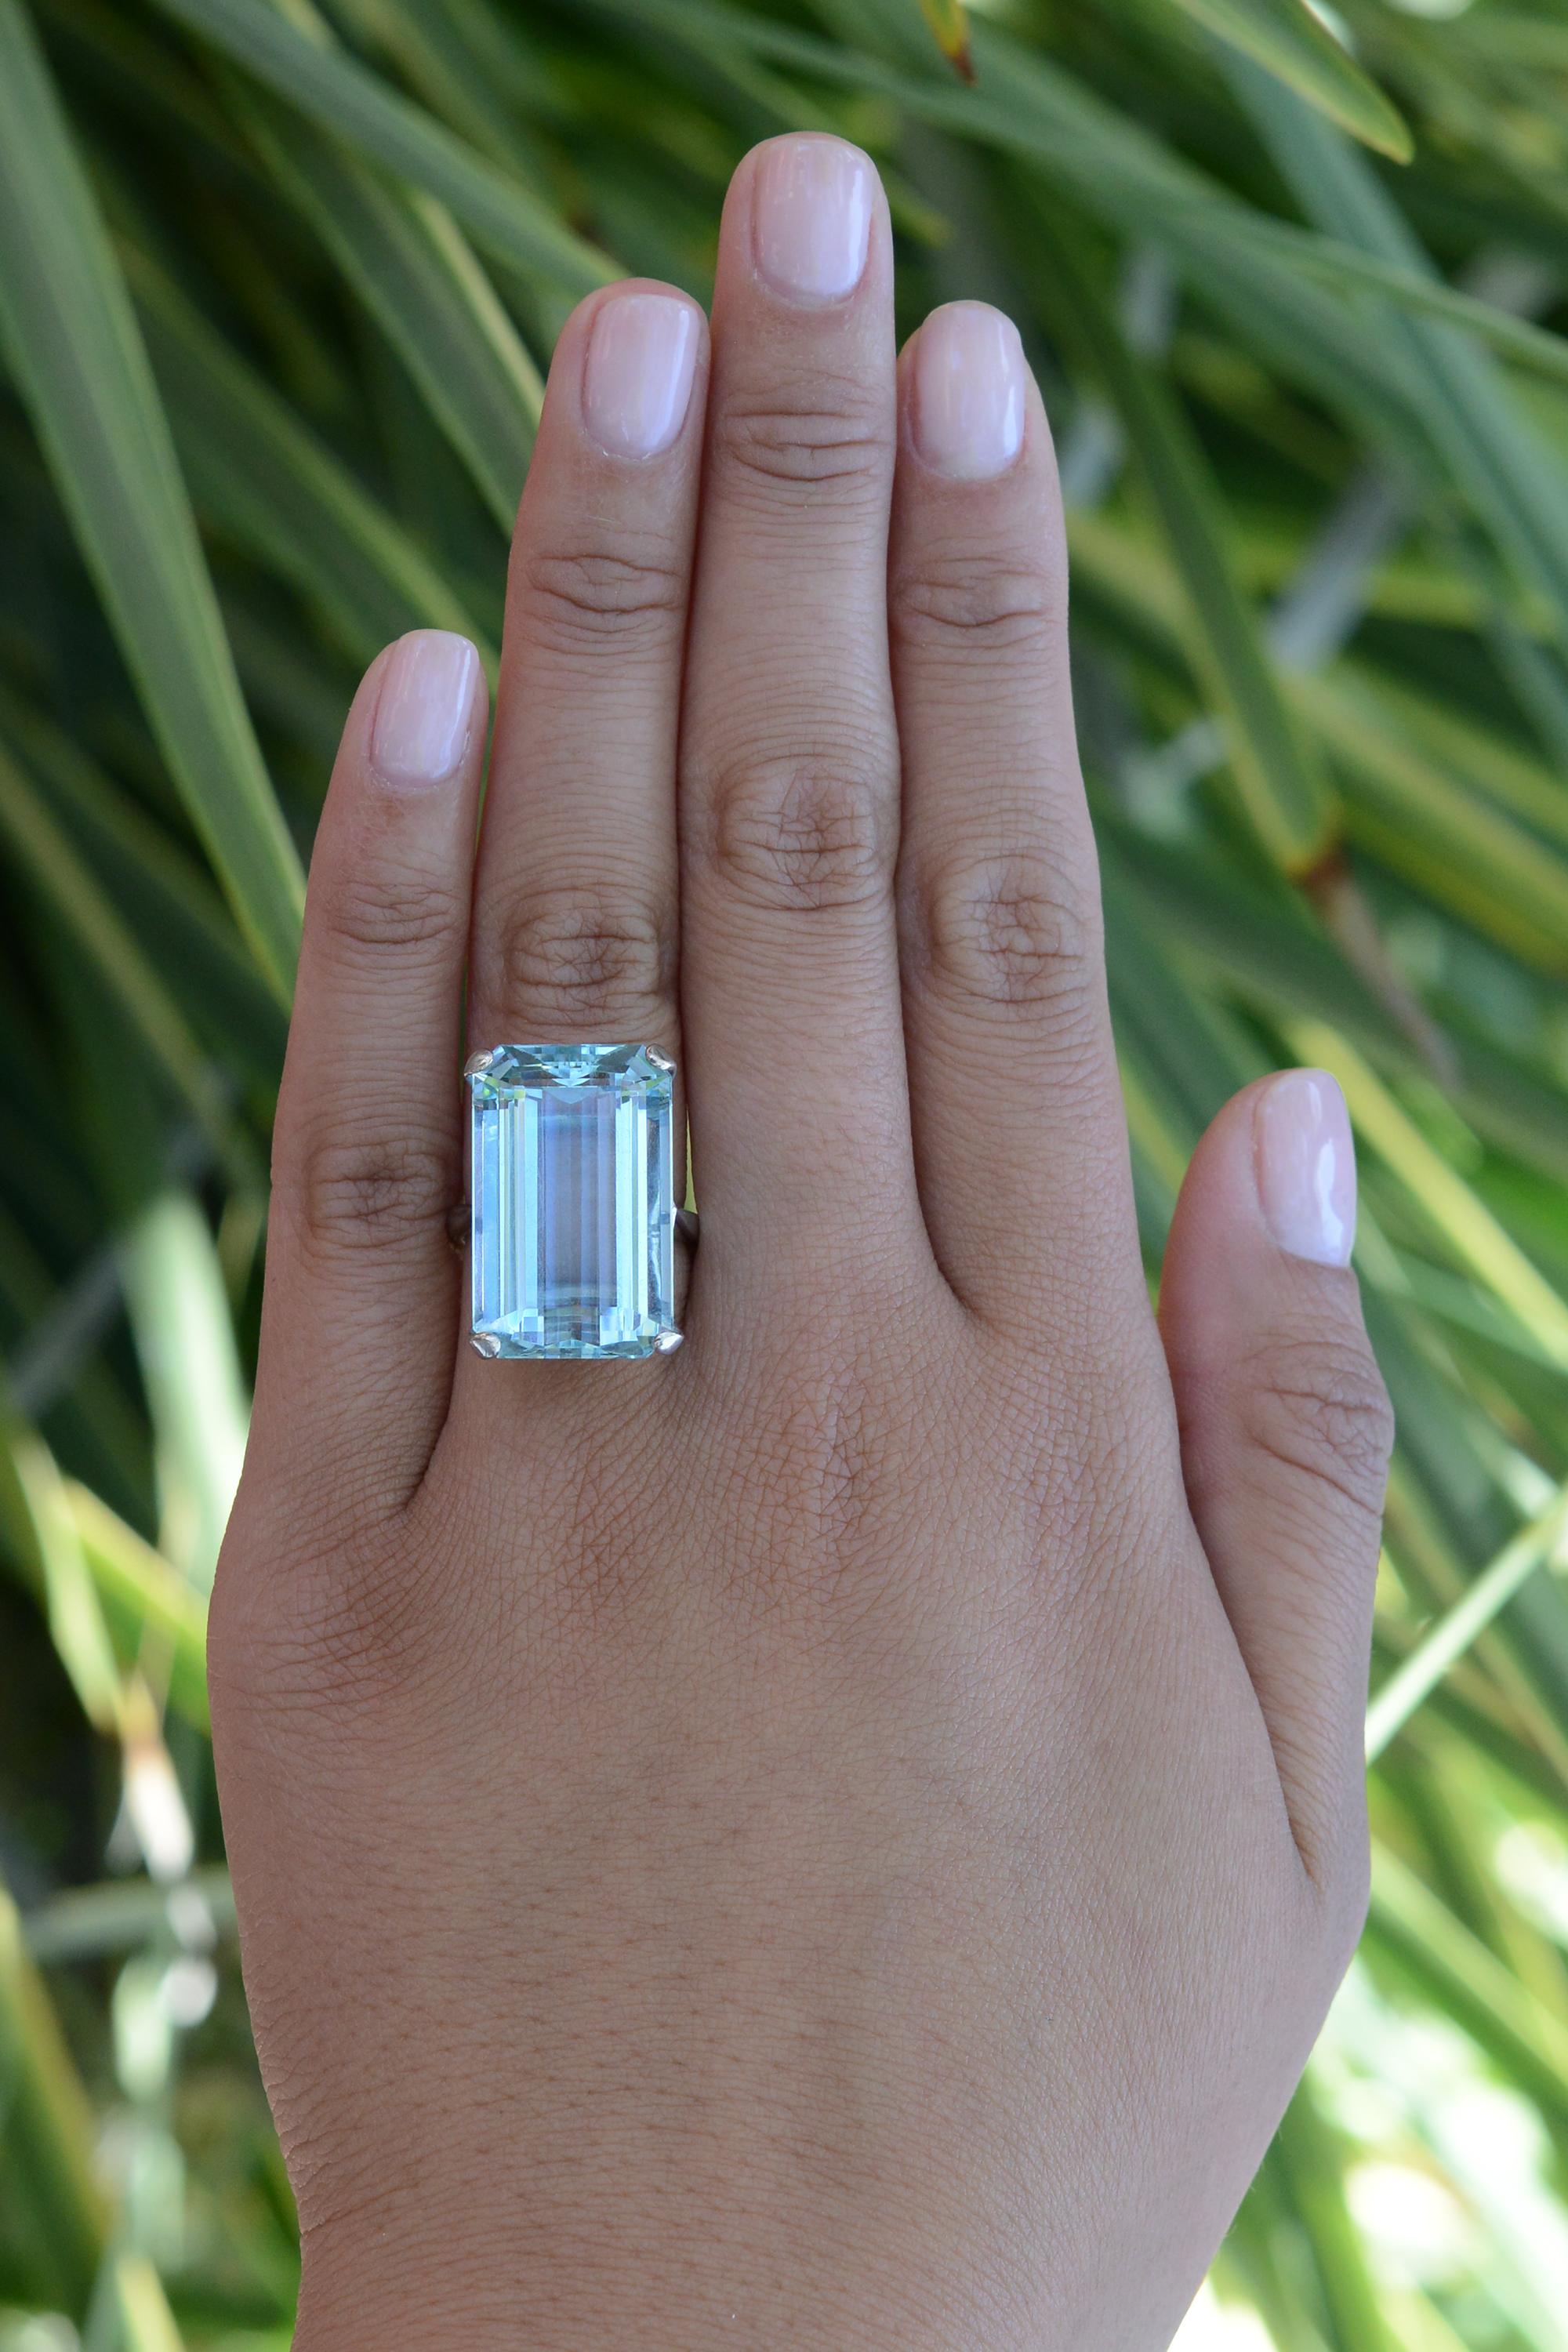 This 1940s Retro cocktail ring showcases an impressive 22 carat emerald-cut aquamarine boasting a deeply saturated and vibrant glacial blue color. An iconic jewel, the aquamarine gemstone has a with a rich history of being carried as a symbol of